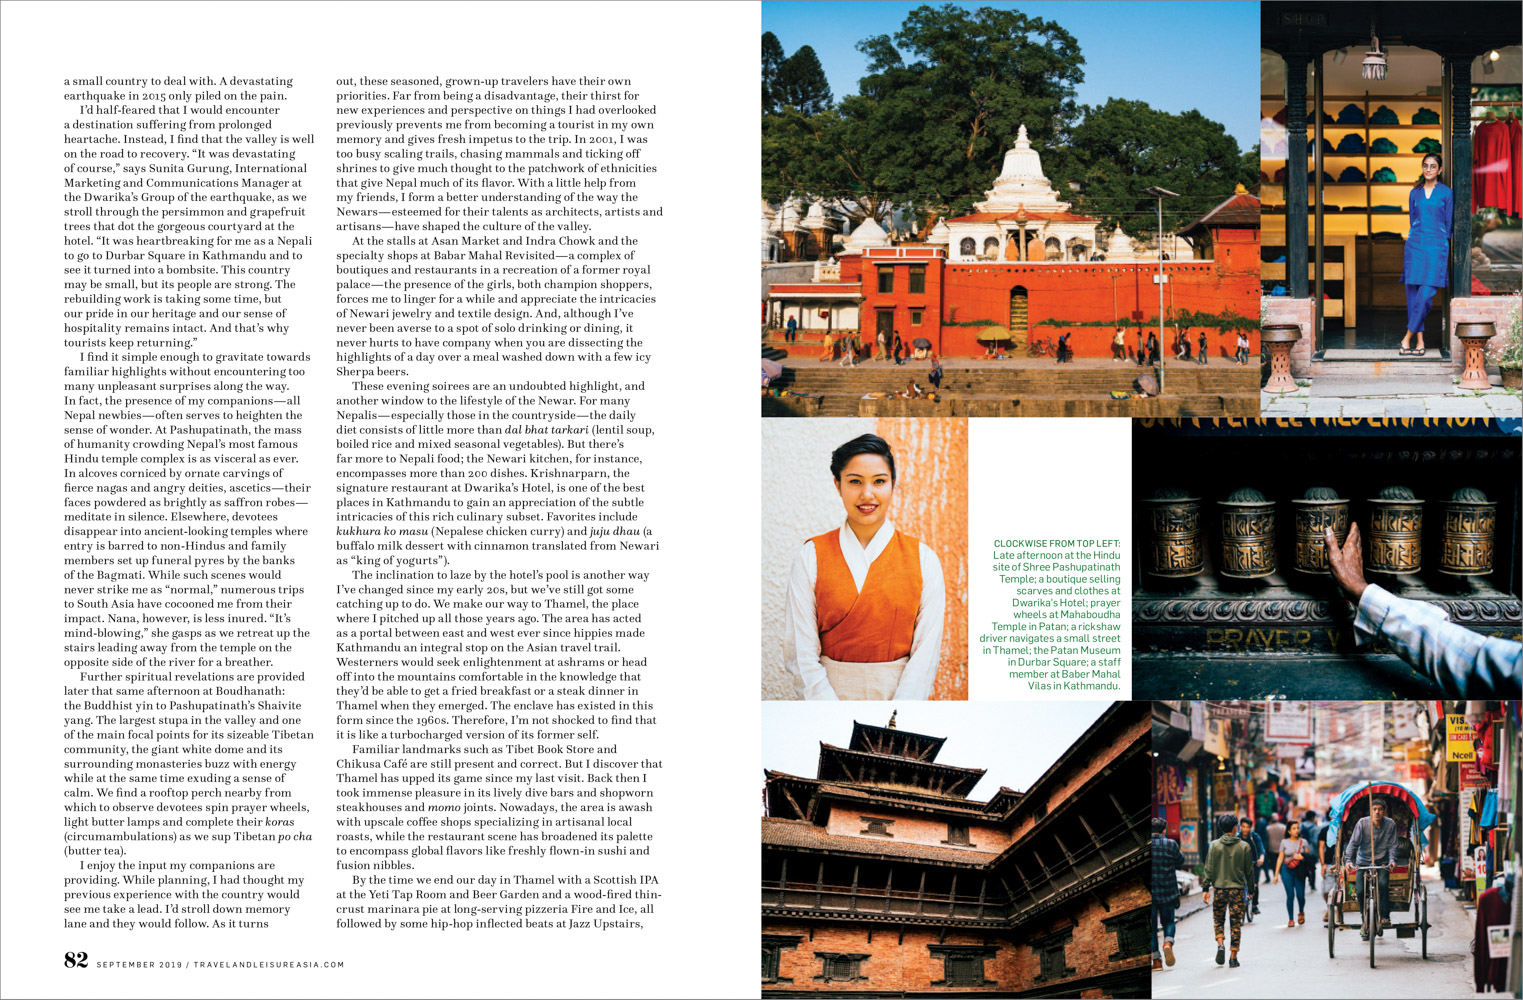 From an editorial travel story on the Kathmandu Valley in Nepal.